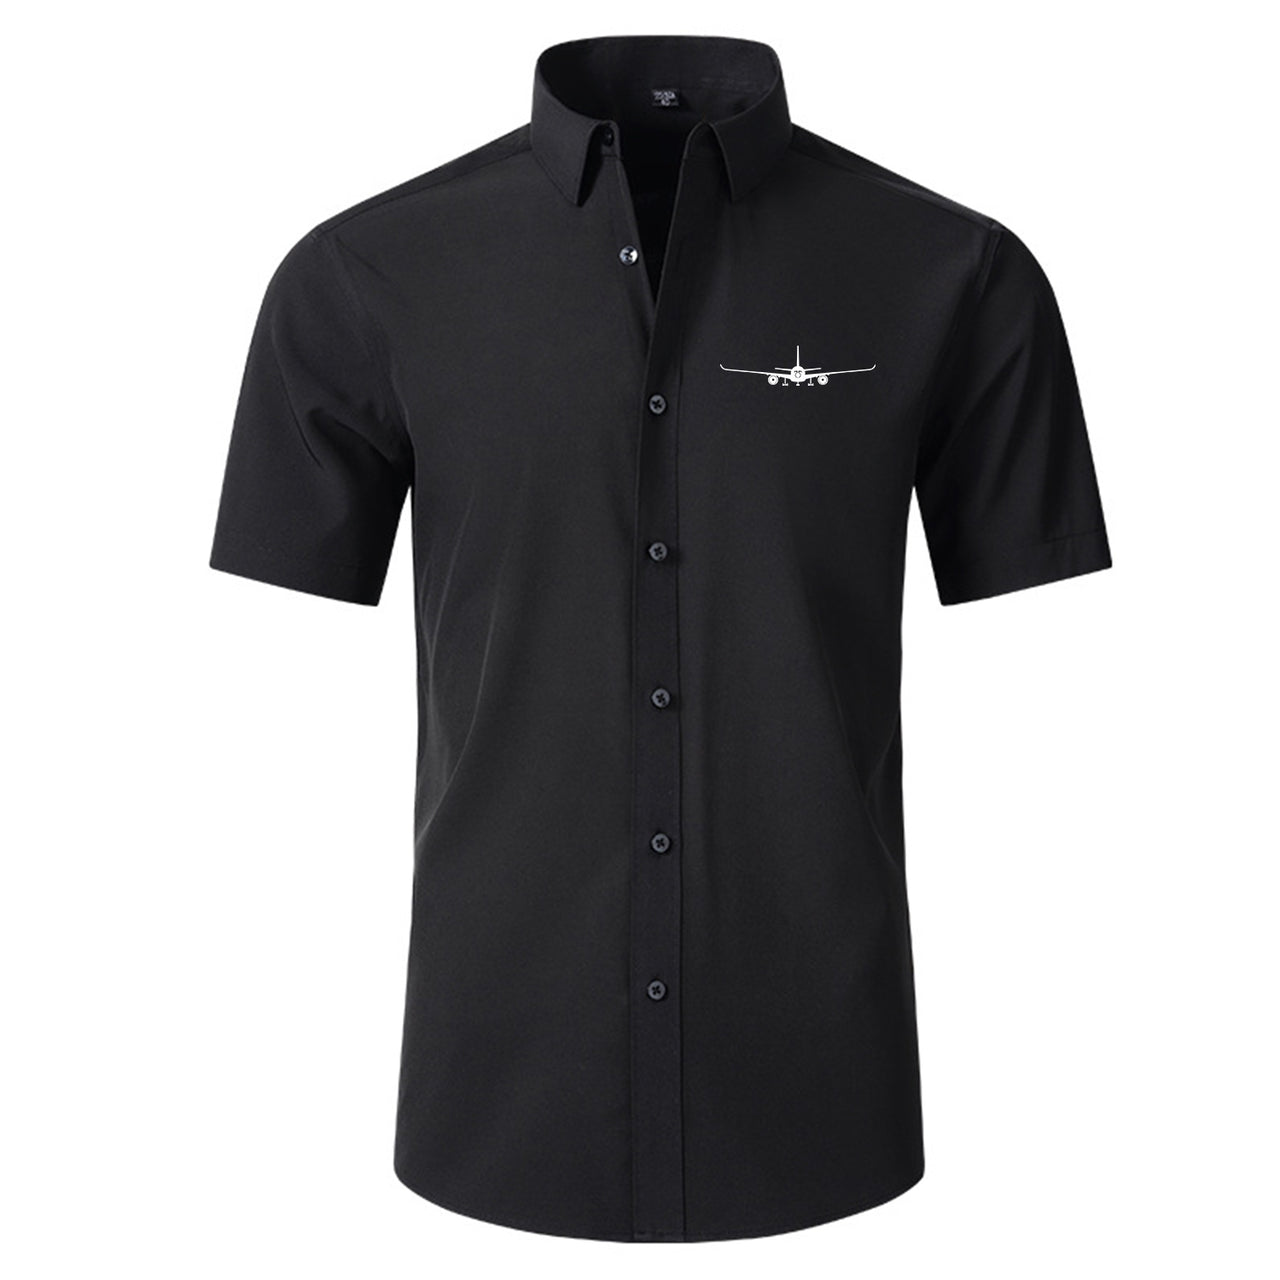 Airbus A350 Silhouette Designed Short Sleeve Shirts